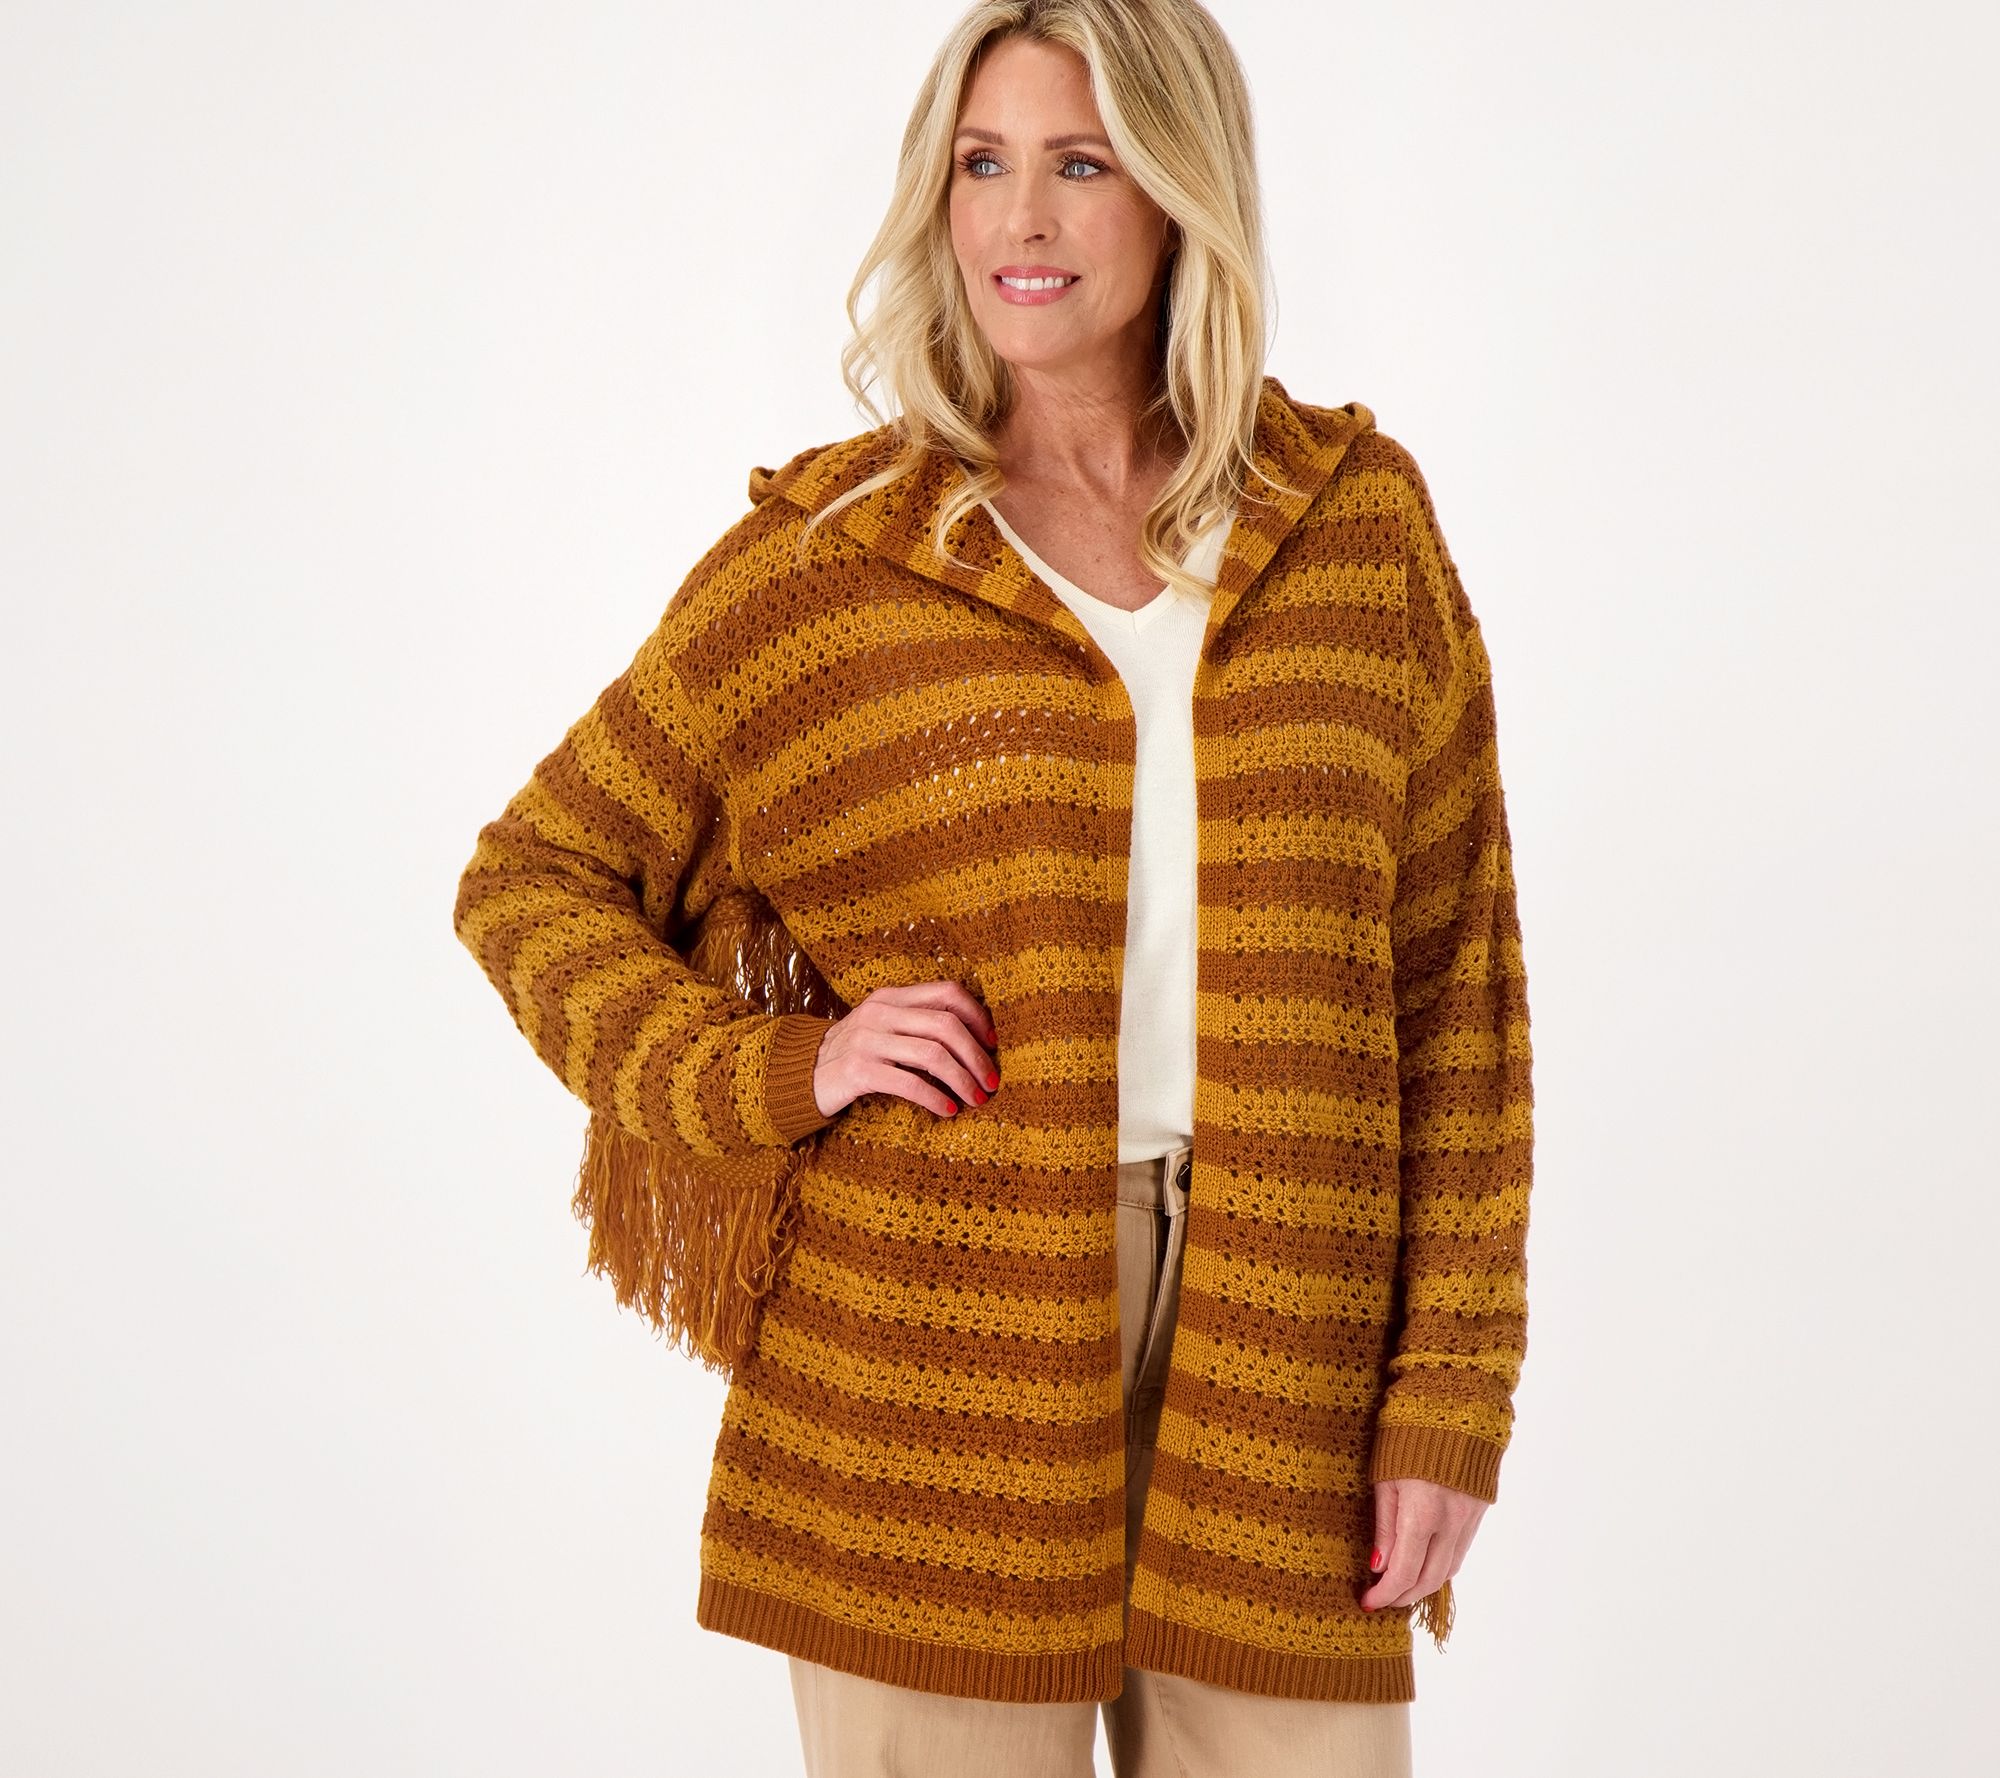 Attitudes by Renee Striped Cardigan w/Hood and Fringe Detail - QVC.com